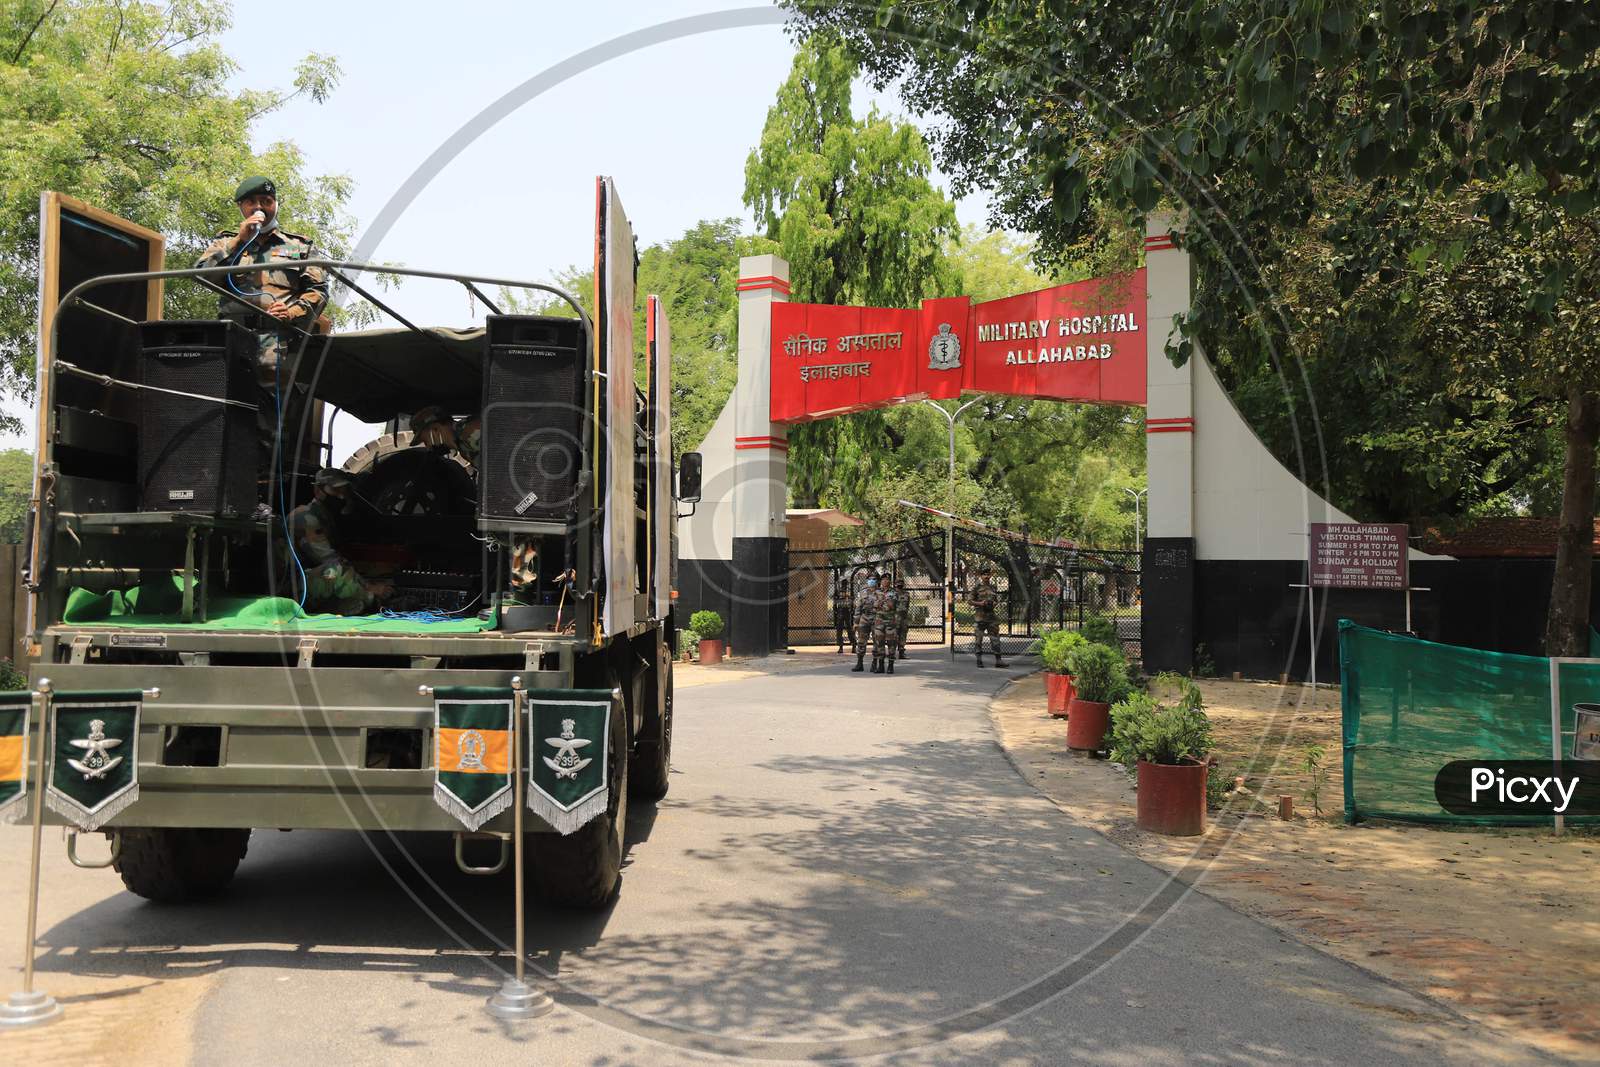 Army men singing songs at a military hospital during a government-imposed nationwide lockdown as a preventive measure against the COVID-19 or Coronavirus in Prayagraj on May 2, 2020.